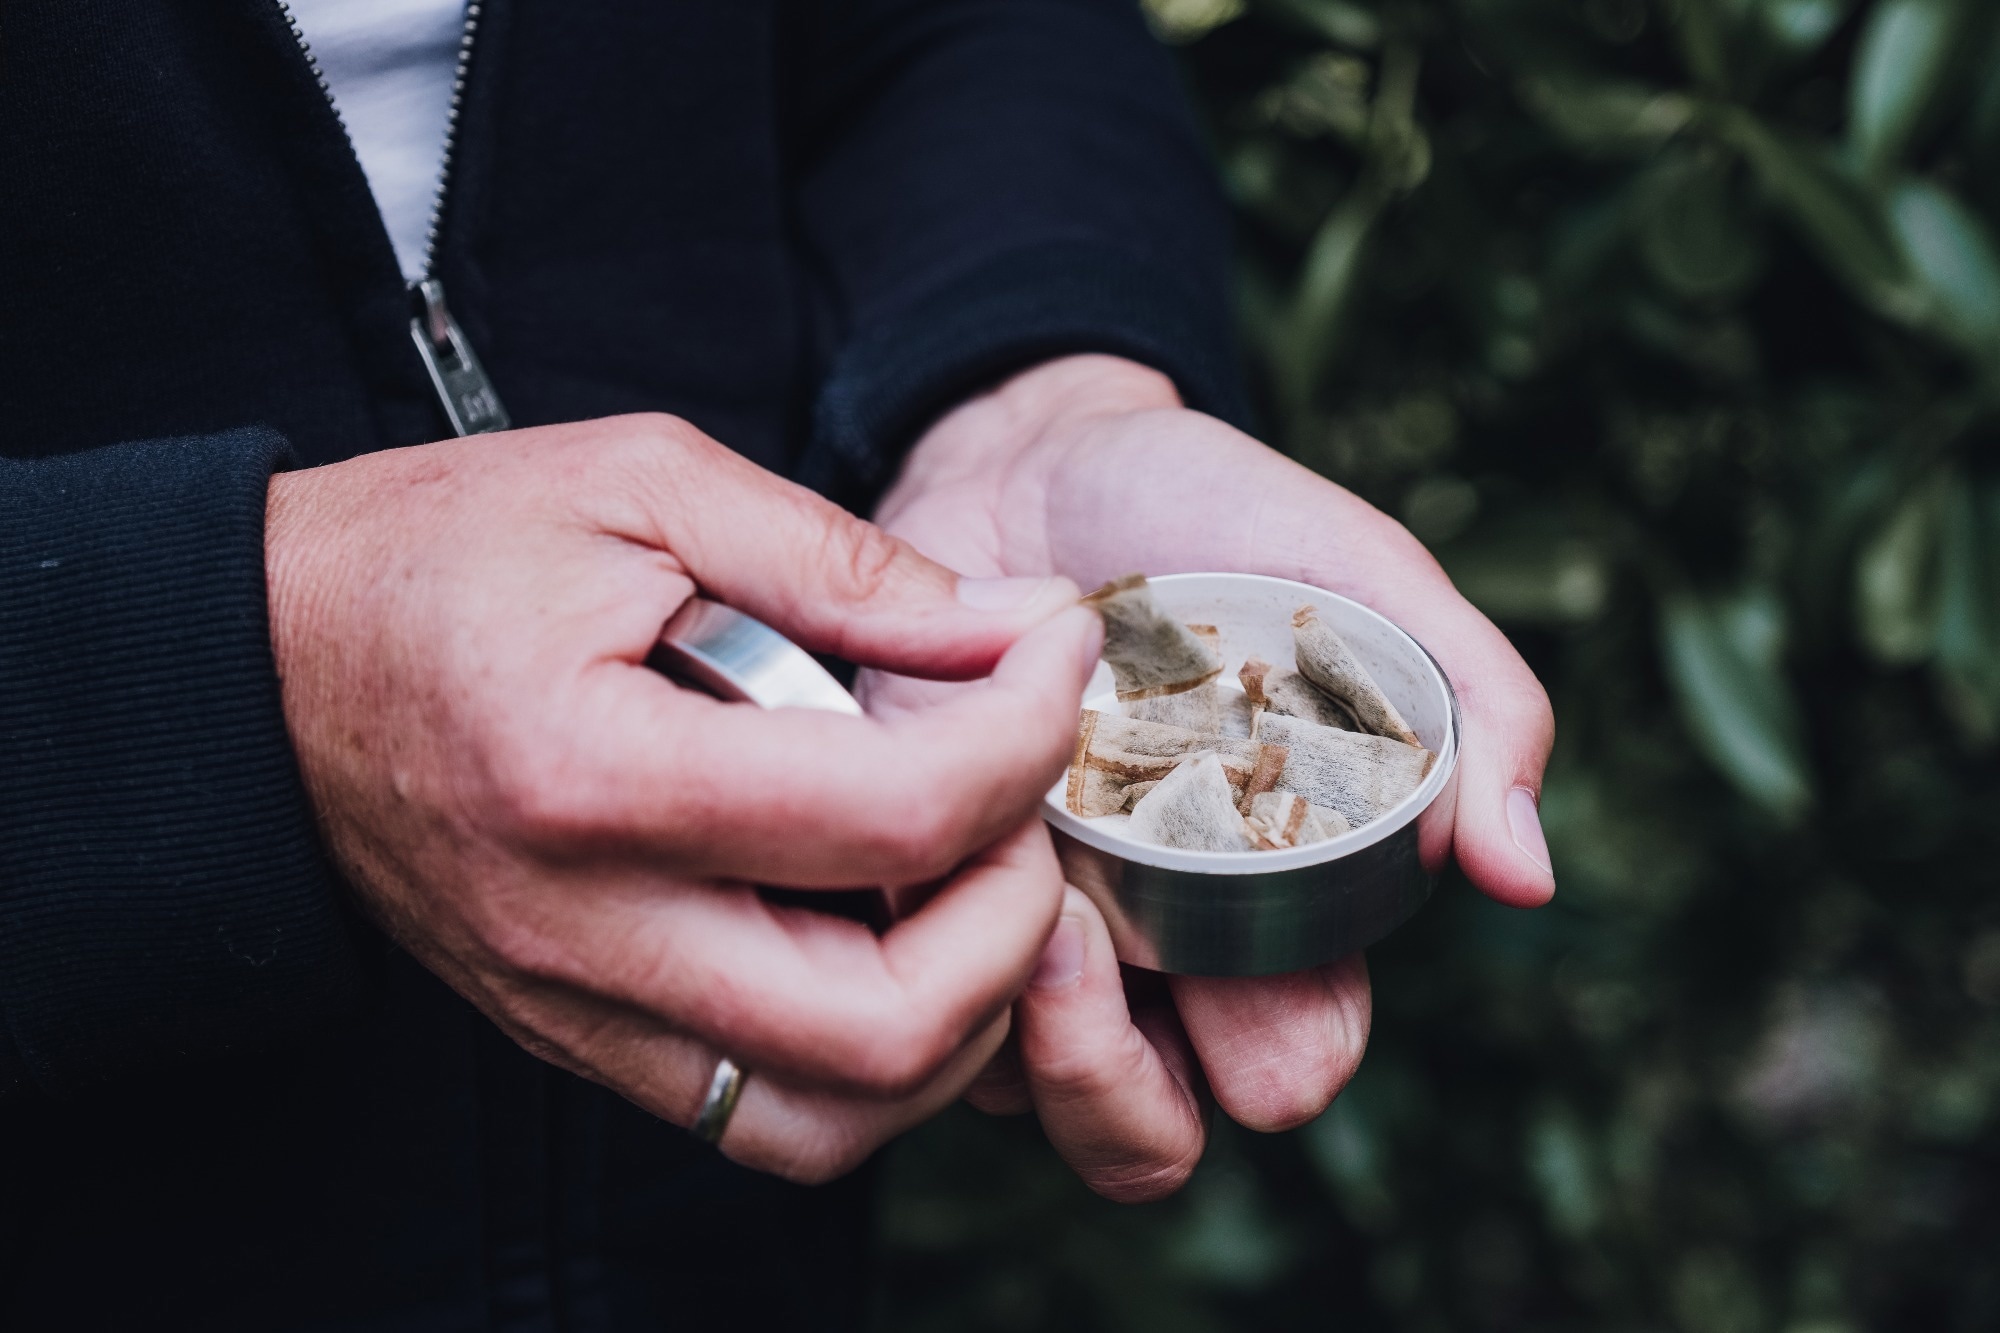 Study: Factors predicting willingness to quit snus and cigarette use among young males. Image Credit: Finn-b/Shutterstock.com